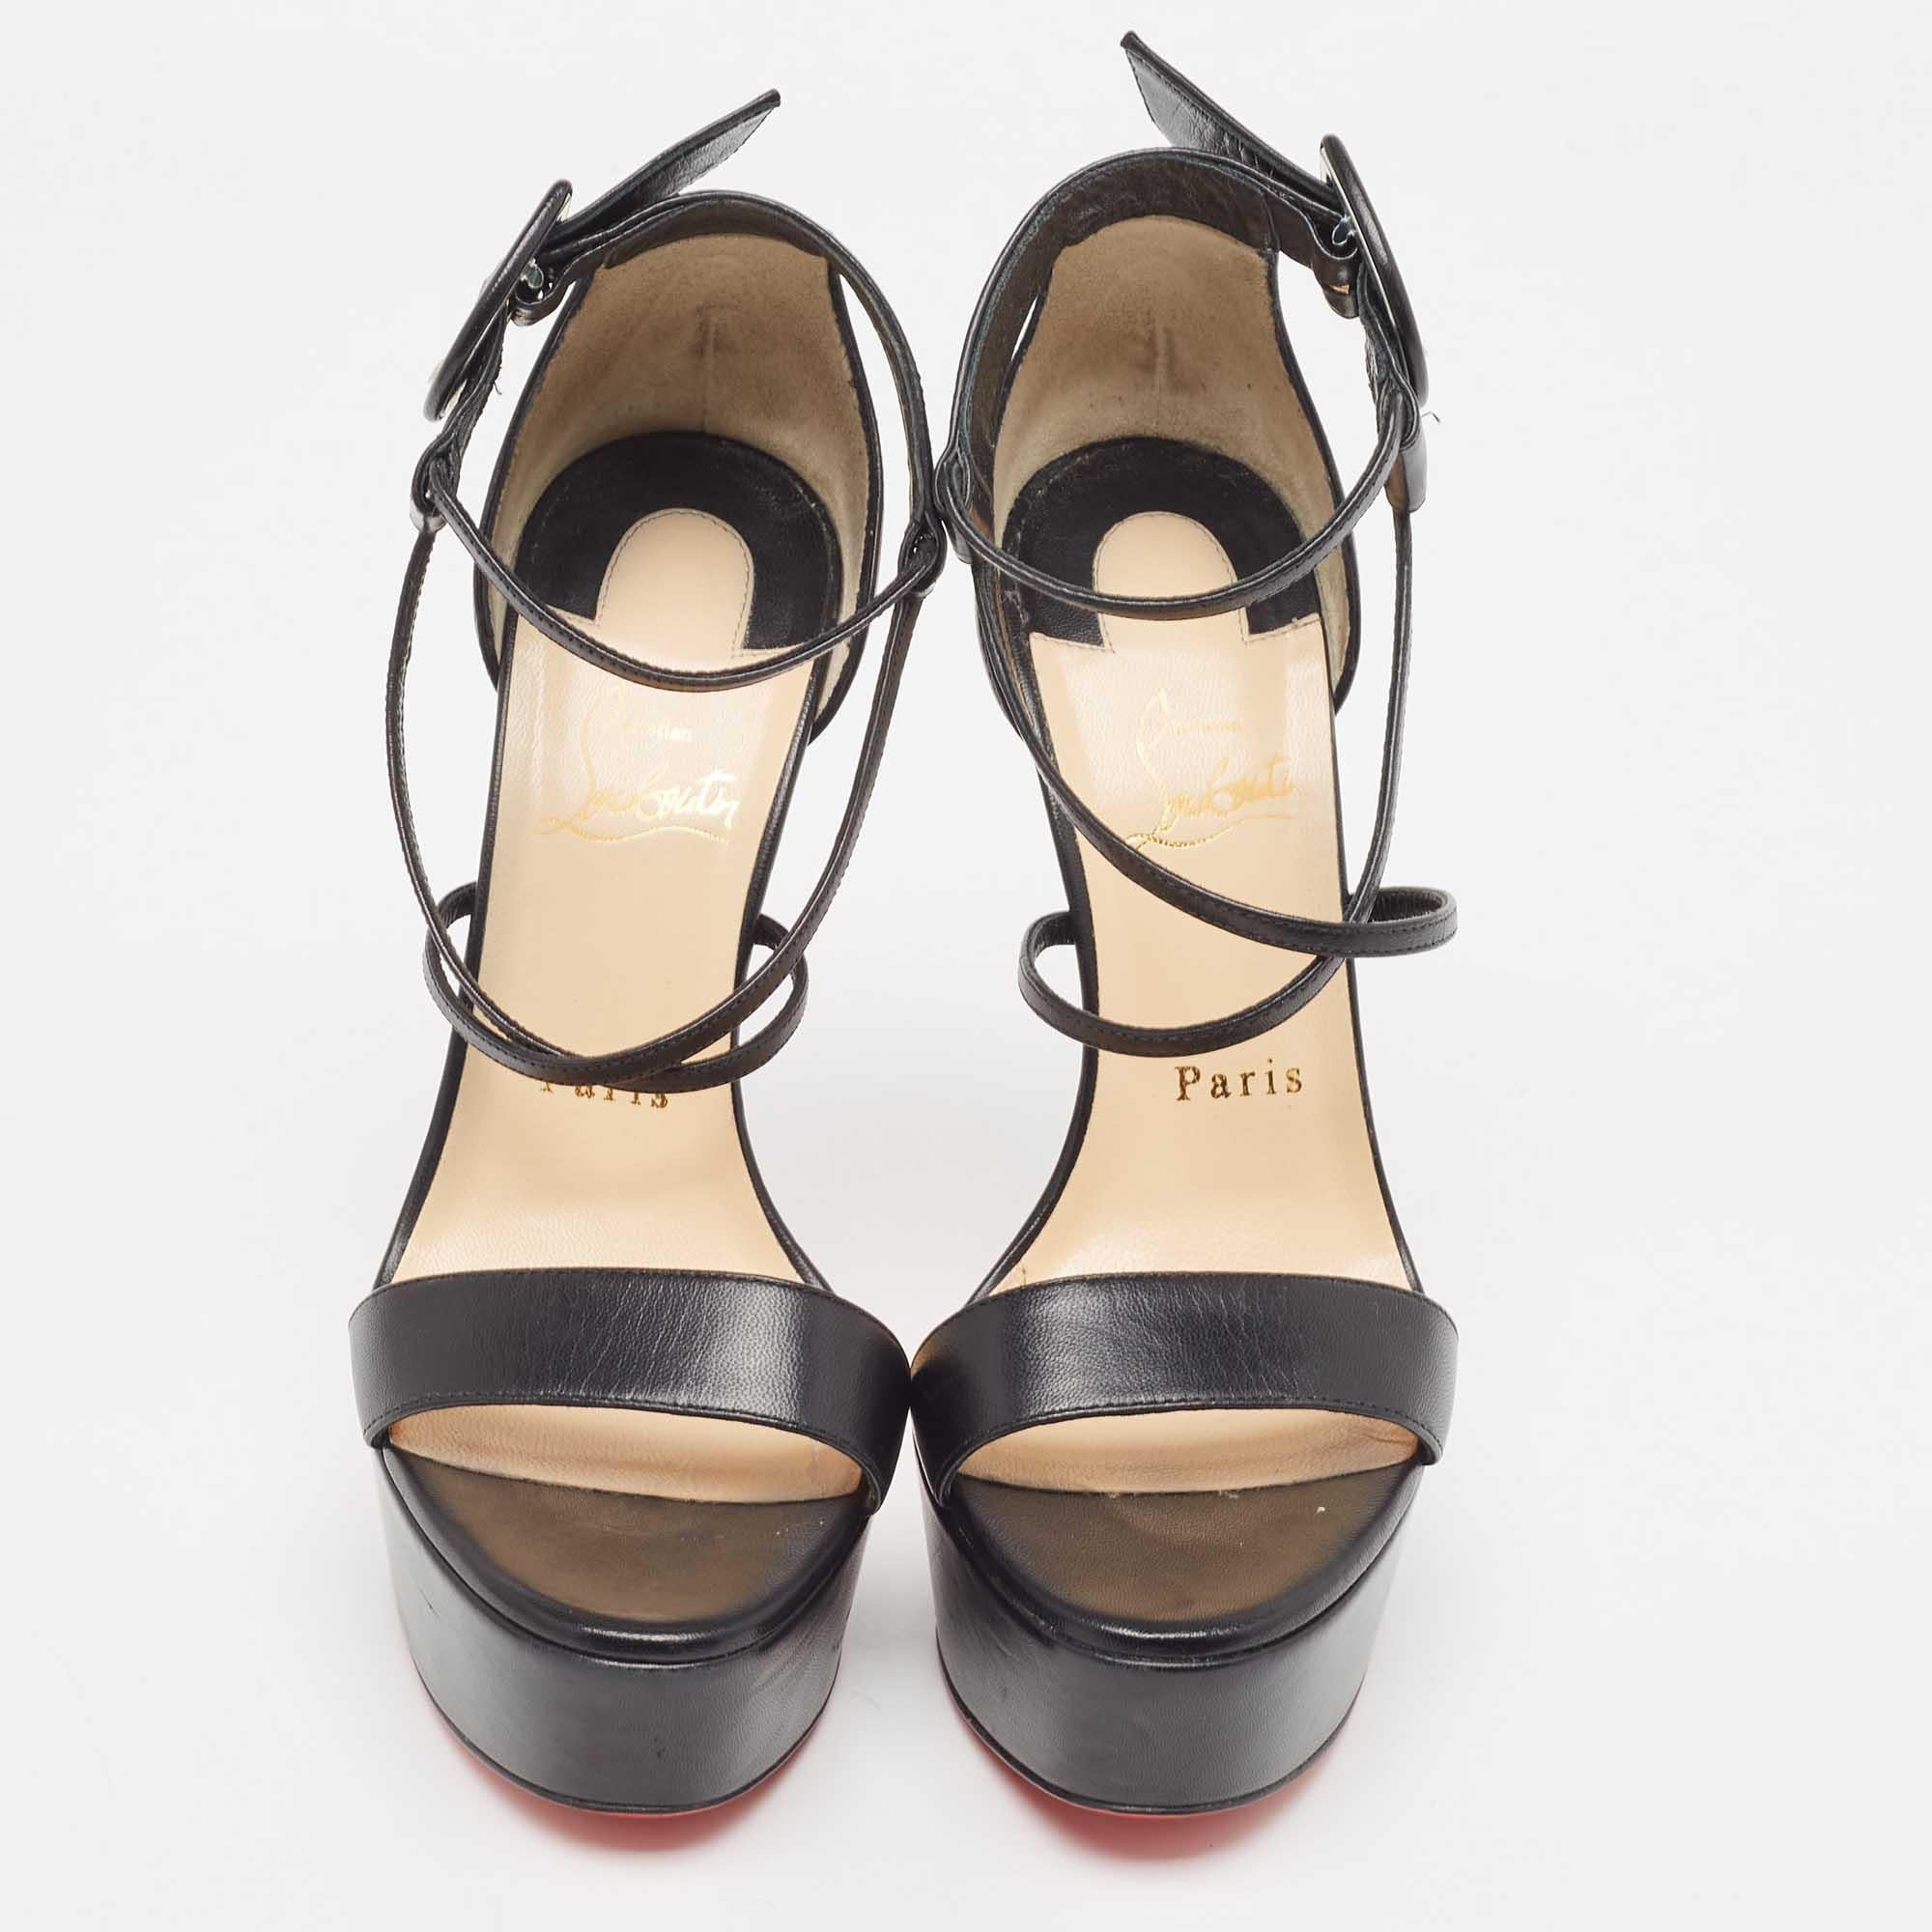 Elevate your ensemble with these Christian Louboutin heels for women. Meticulously crafted, these exquisite heels exude luxury and style. A statement of grace and confidence, perfect for any occasion.

